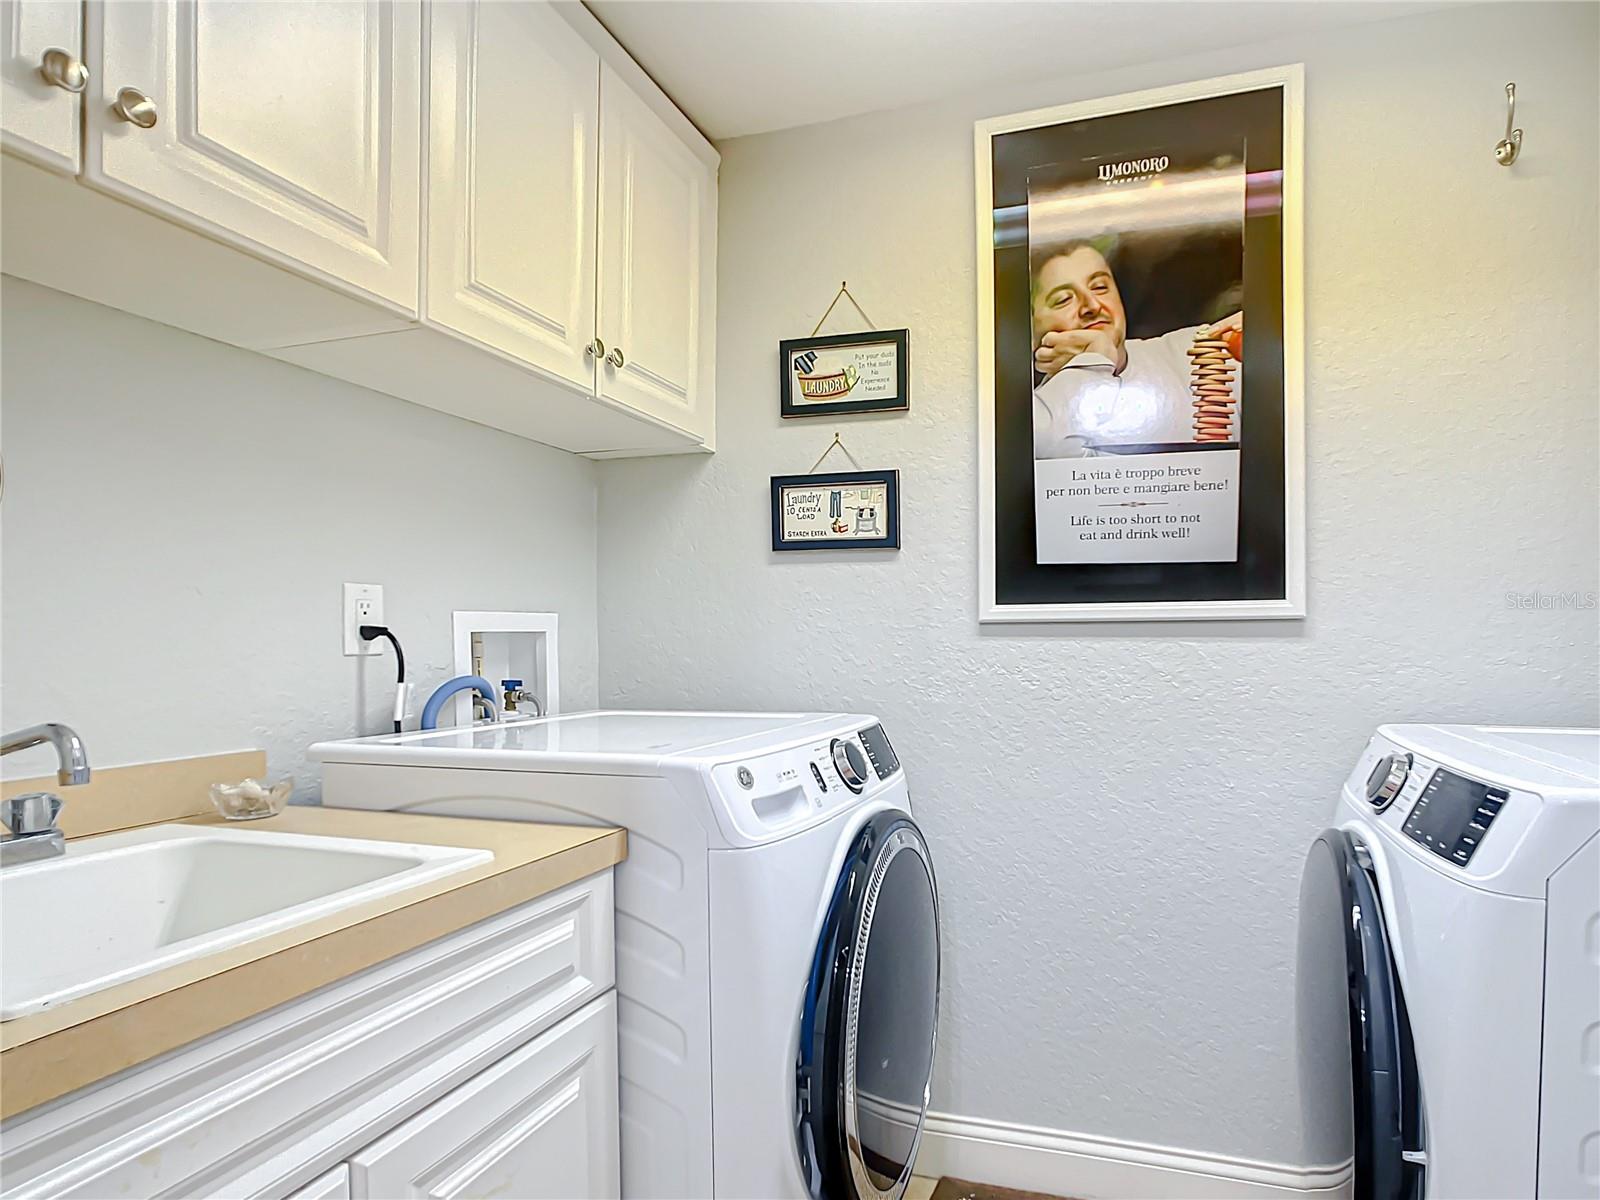 Having a separate laundry room that includes a sink is so nice.